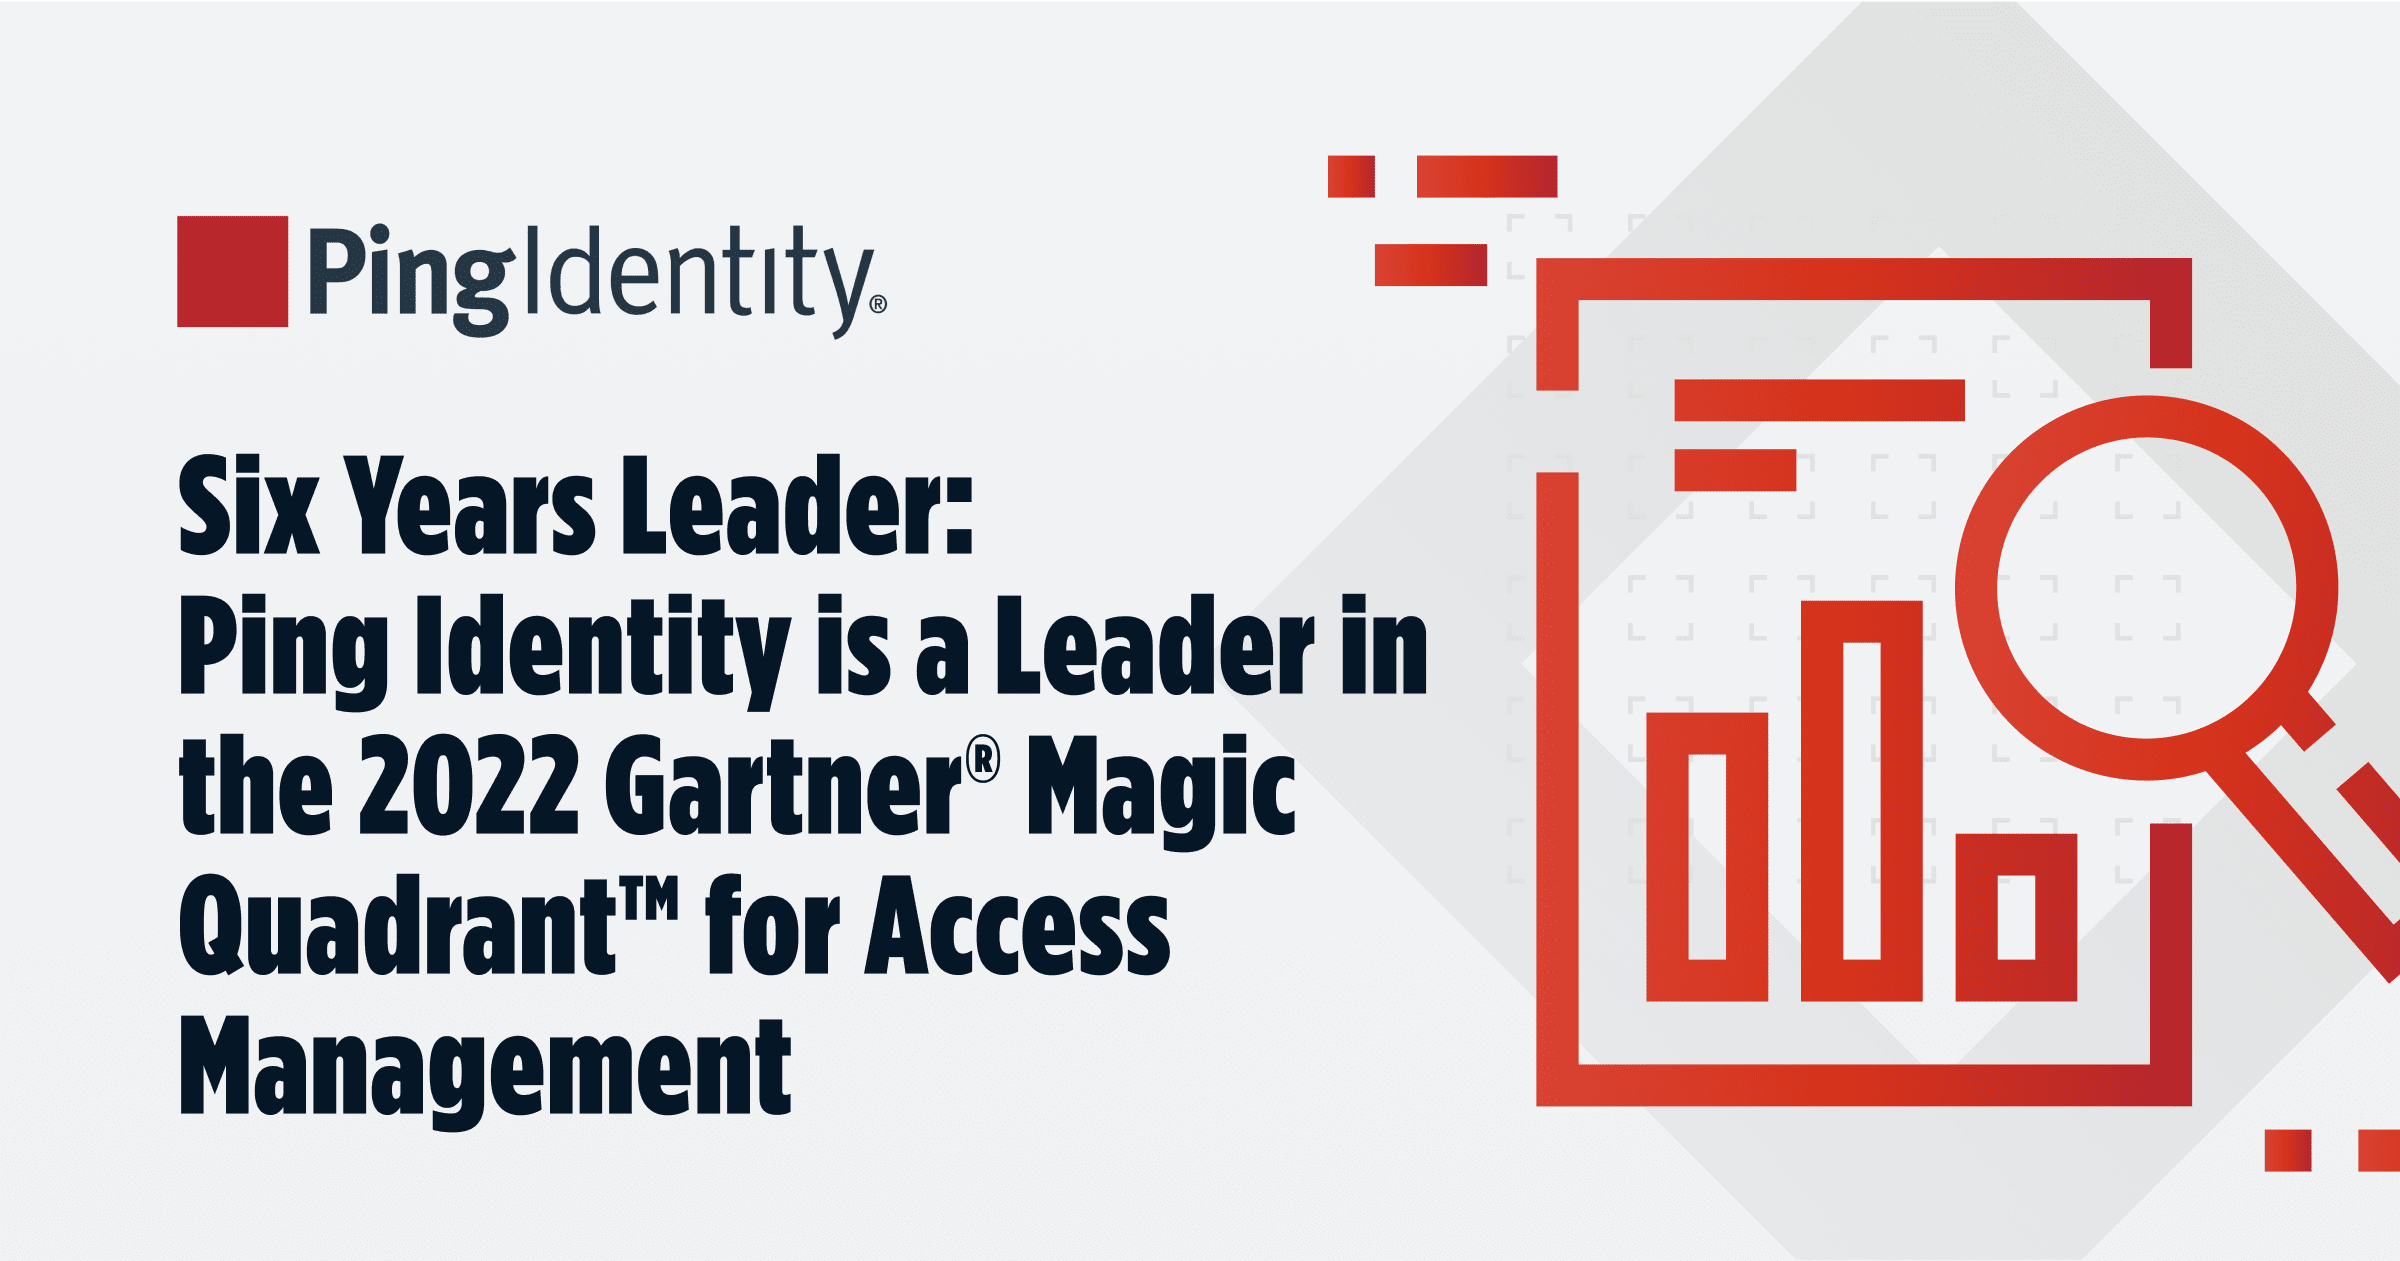 Six Years Leader: Ping Identity is a Leader in the 2022 Gartner® Magic Quadrant™ for Access Management